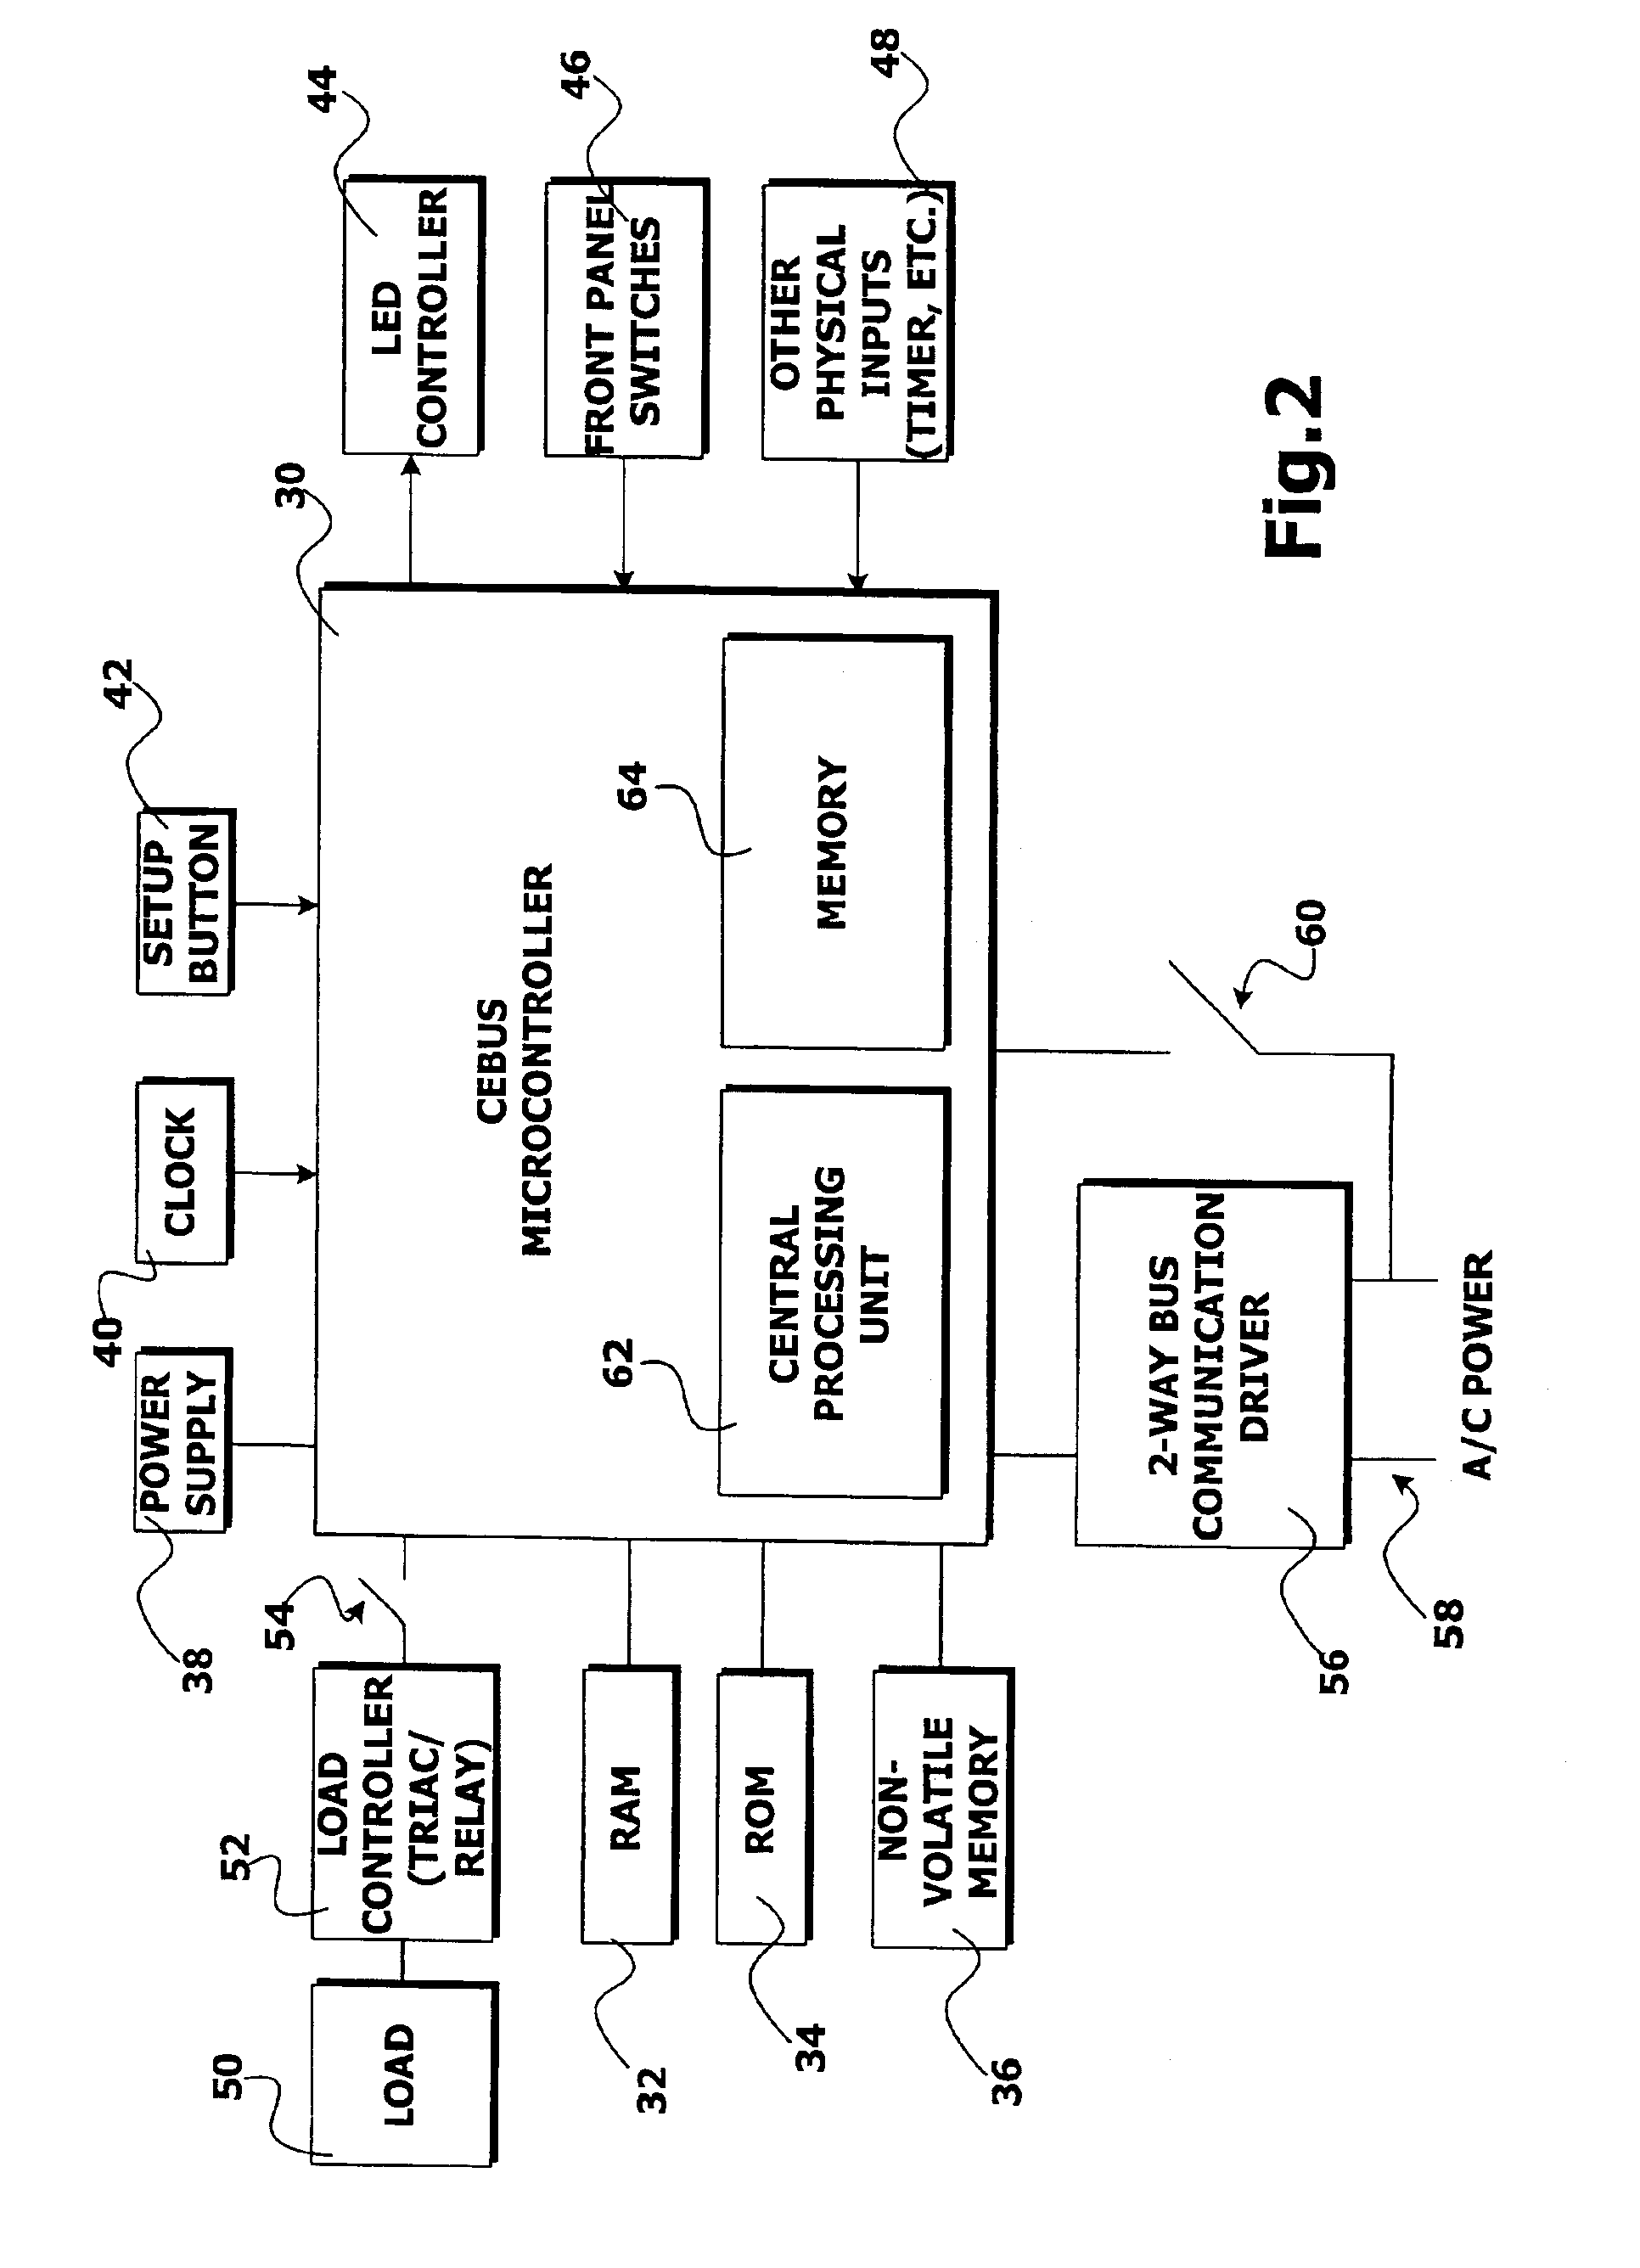 Method and apparatus for providing distributed control of a home automation system